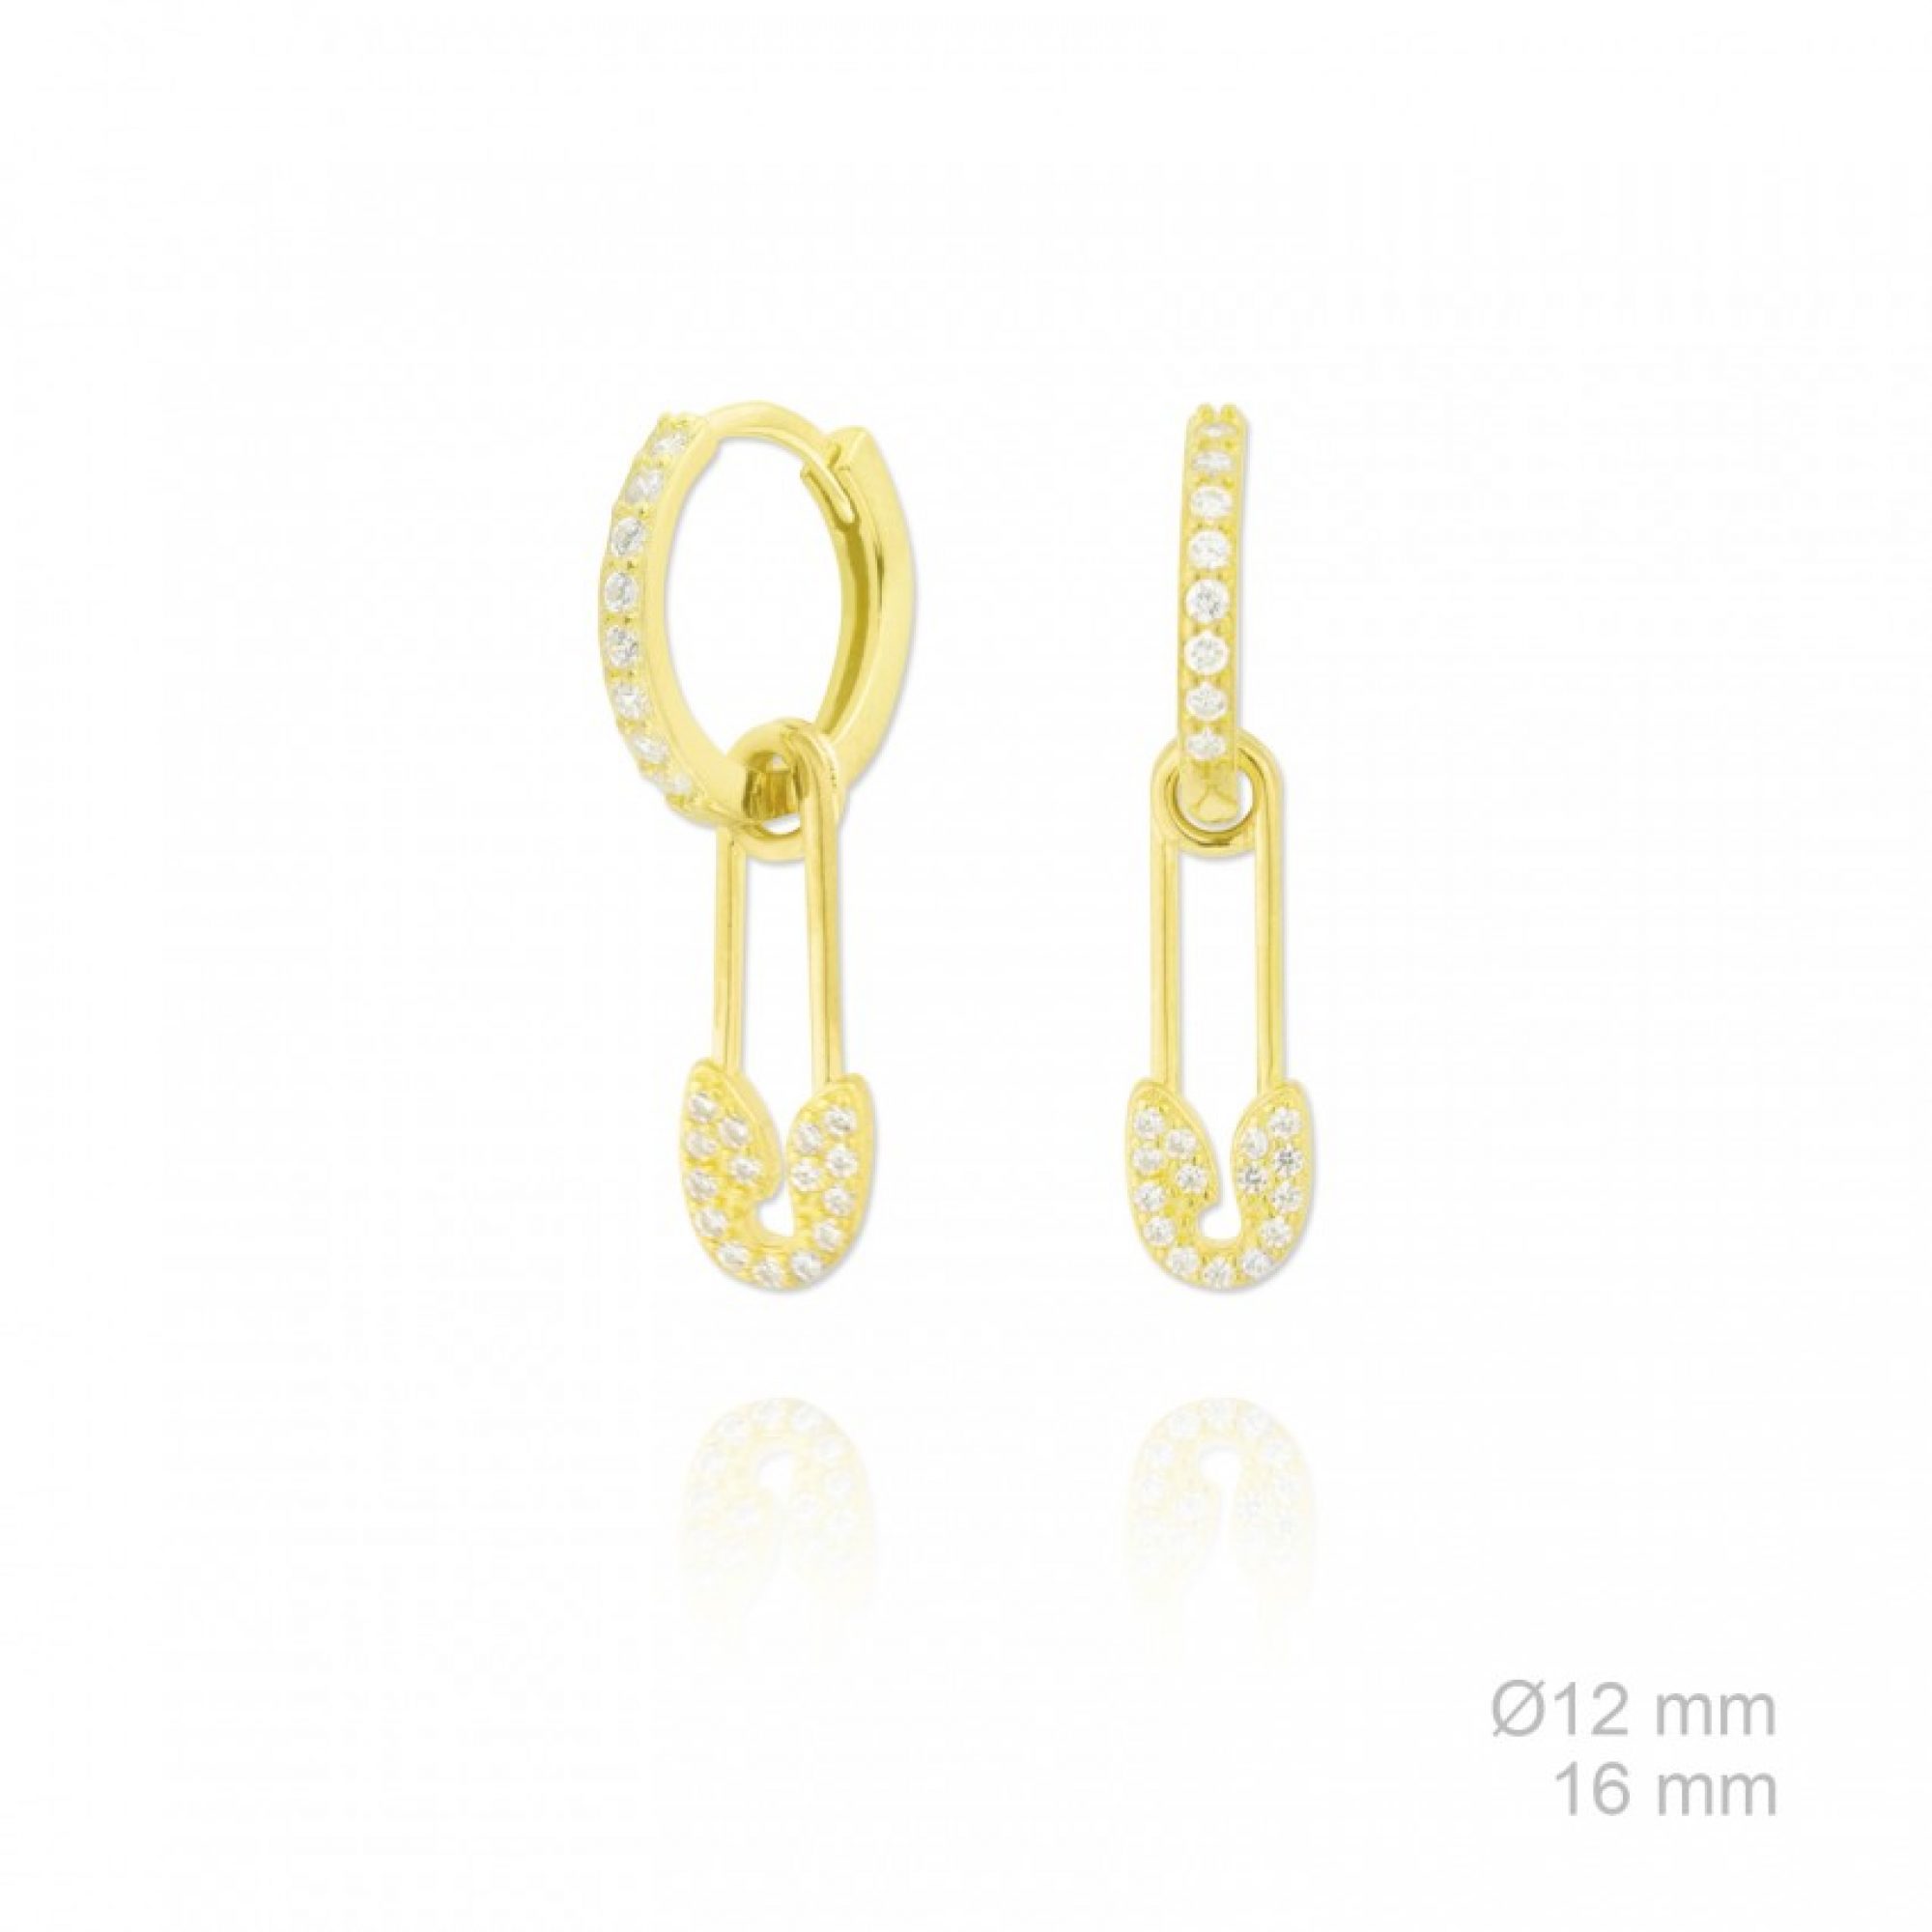 Gold plated earrings with natural zircon stones